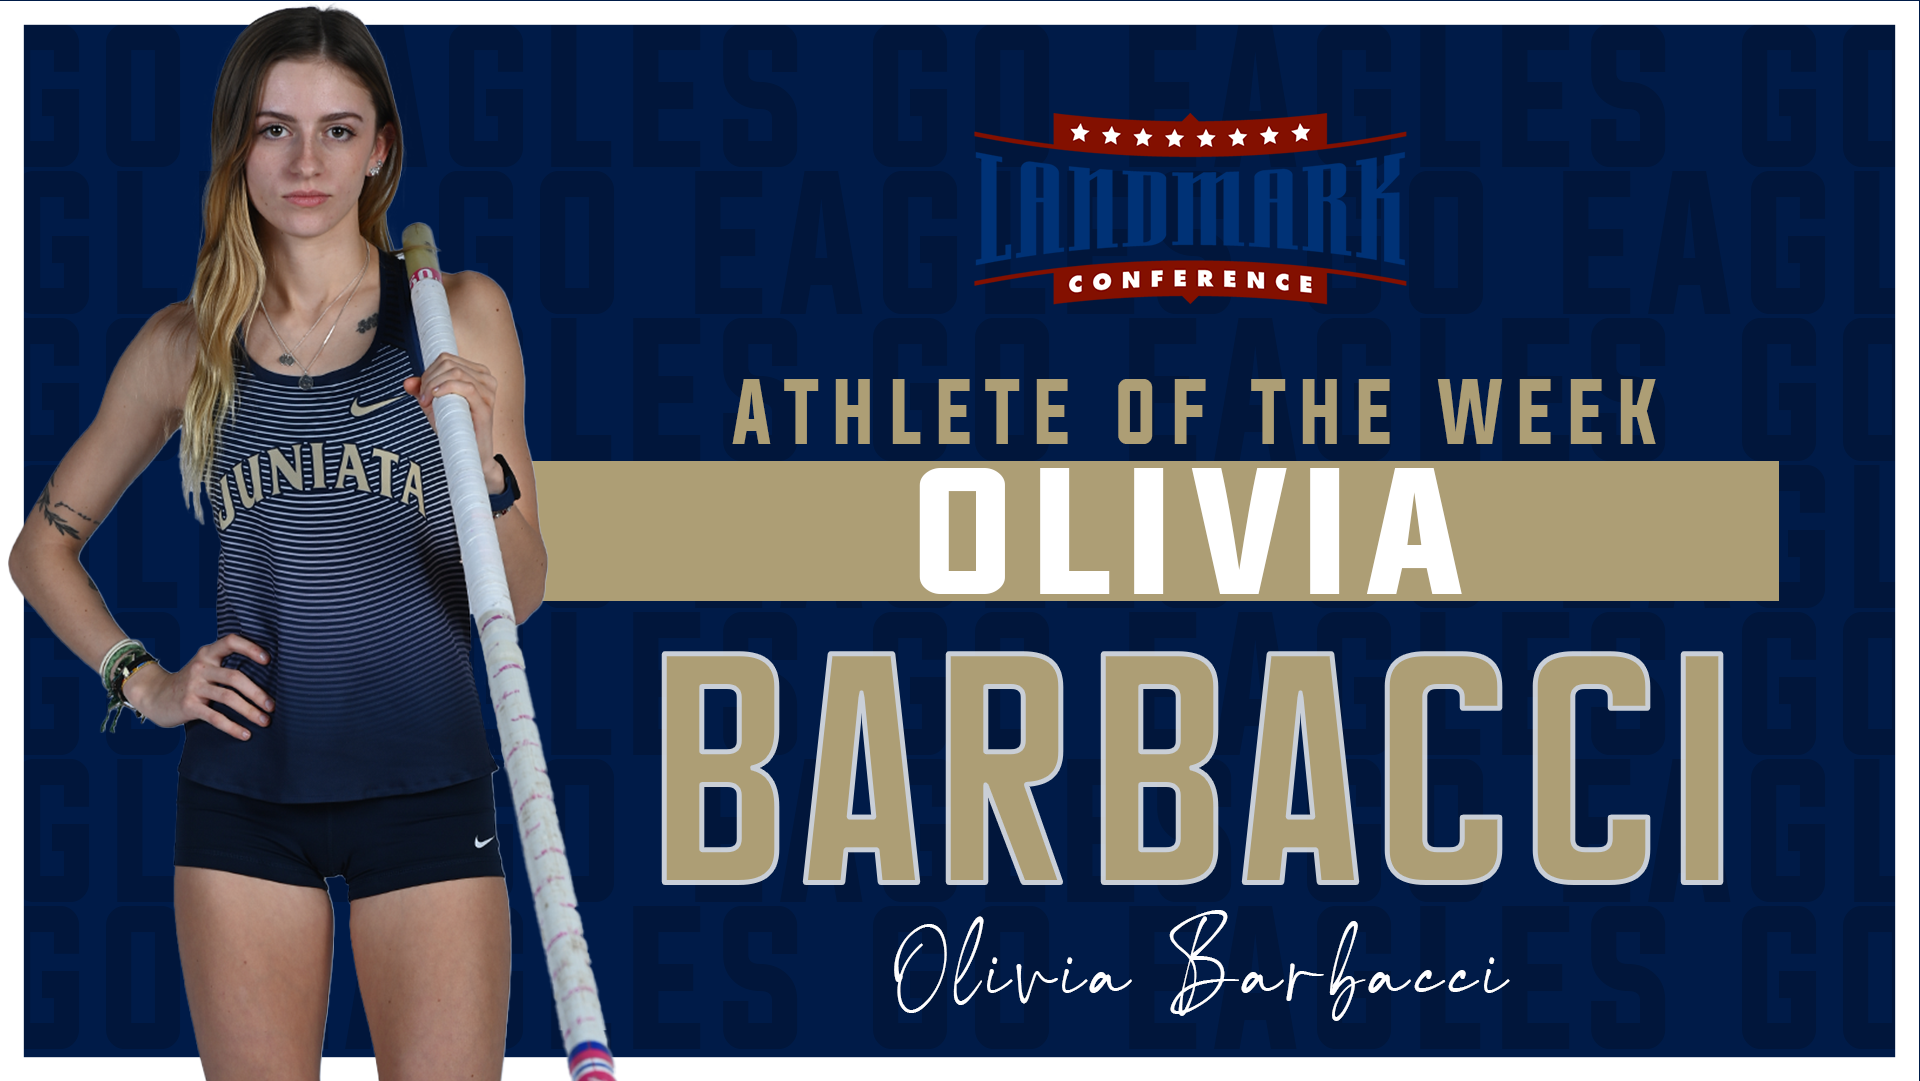 Barbacci Named Landmark Athlete of the Week for Field Events